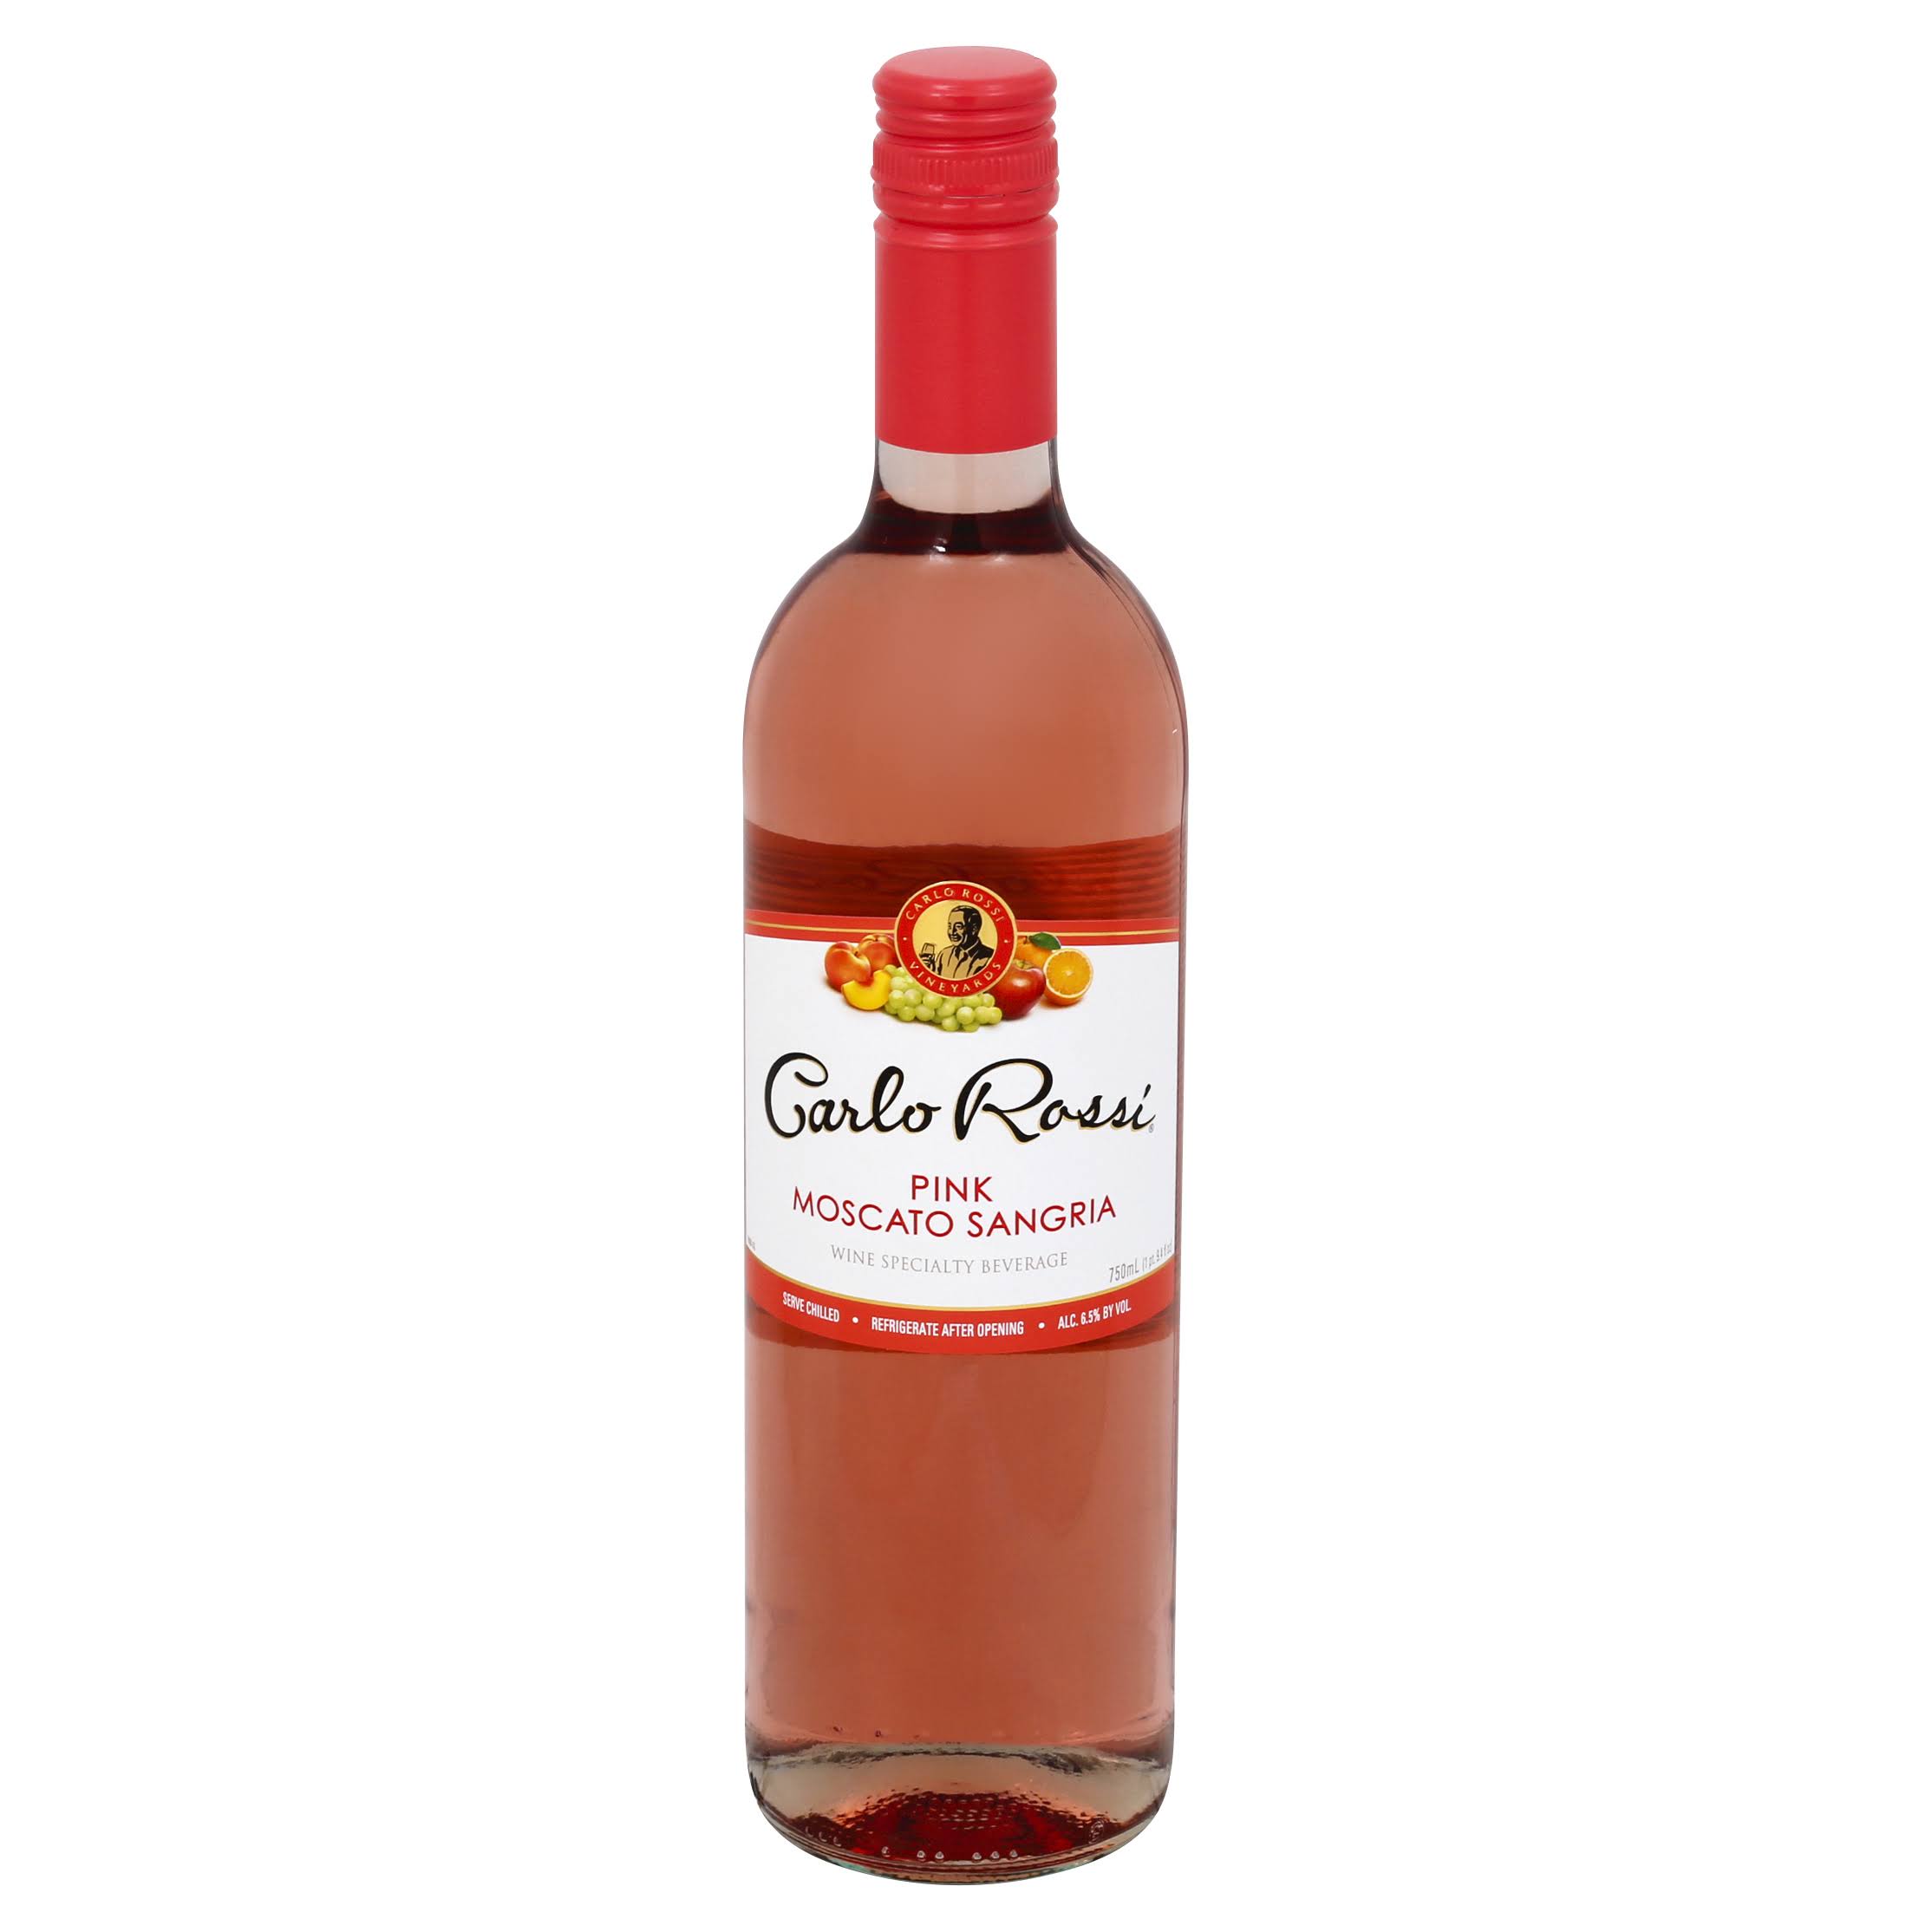 Carlo Rossi Moscato Sangria, Pink - 750 ml